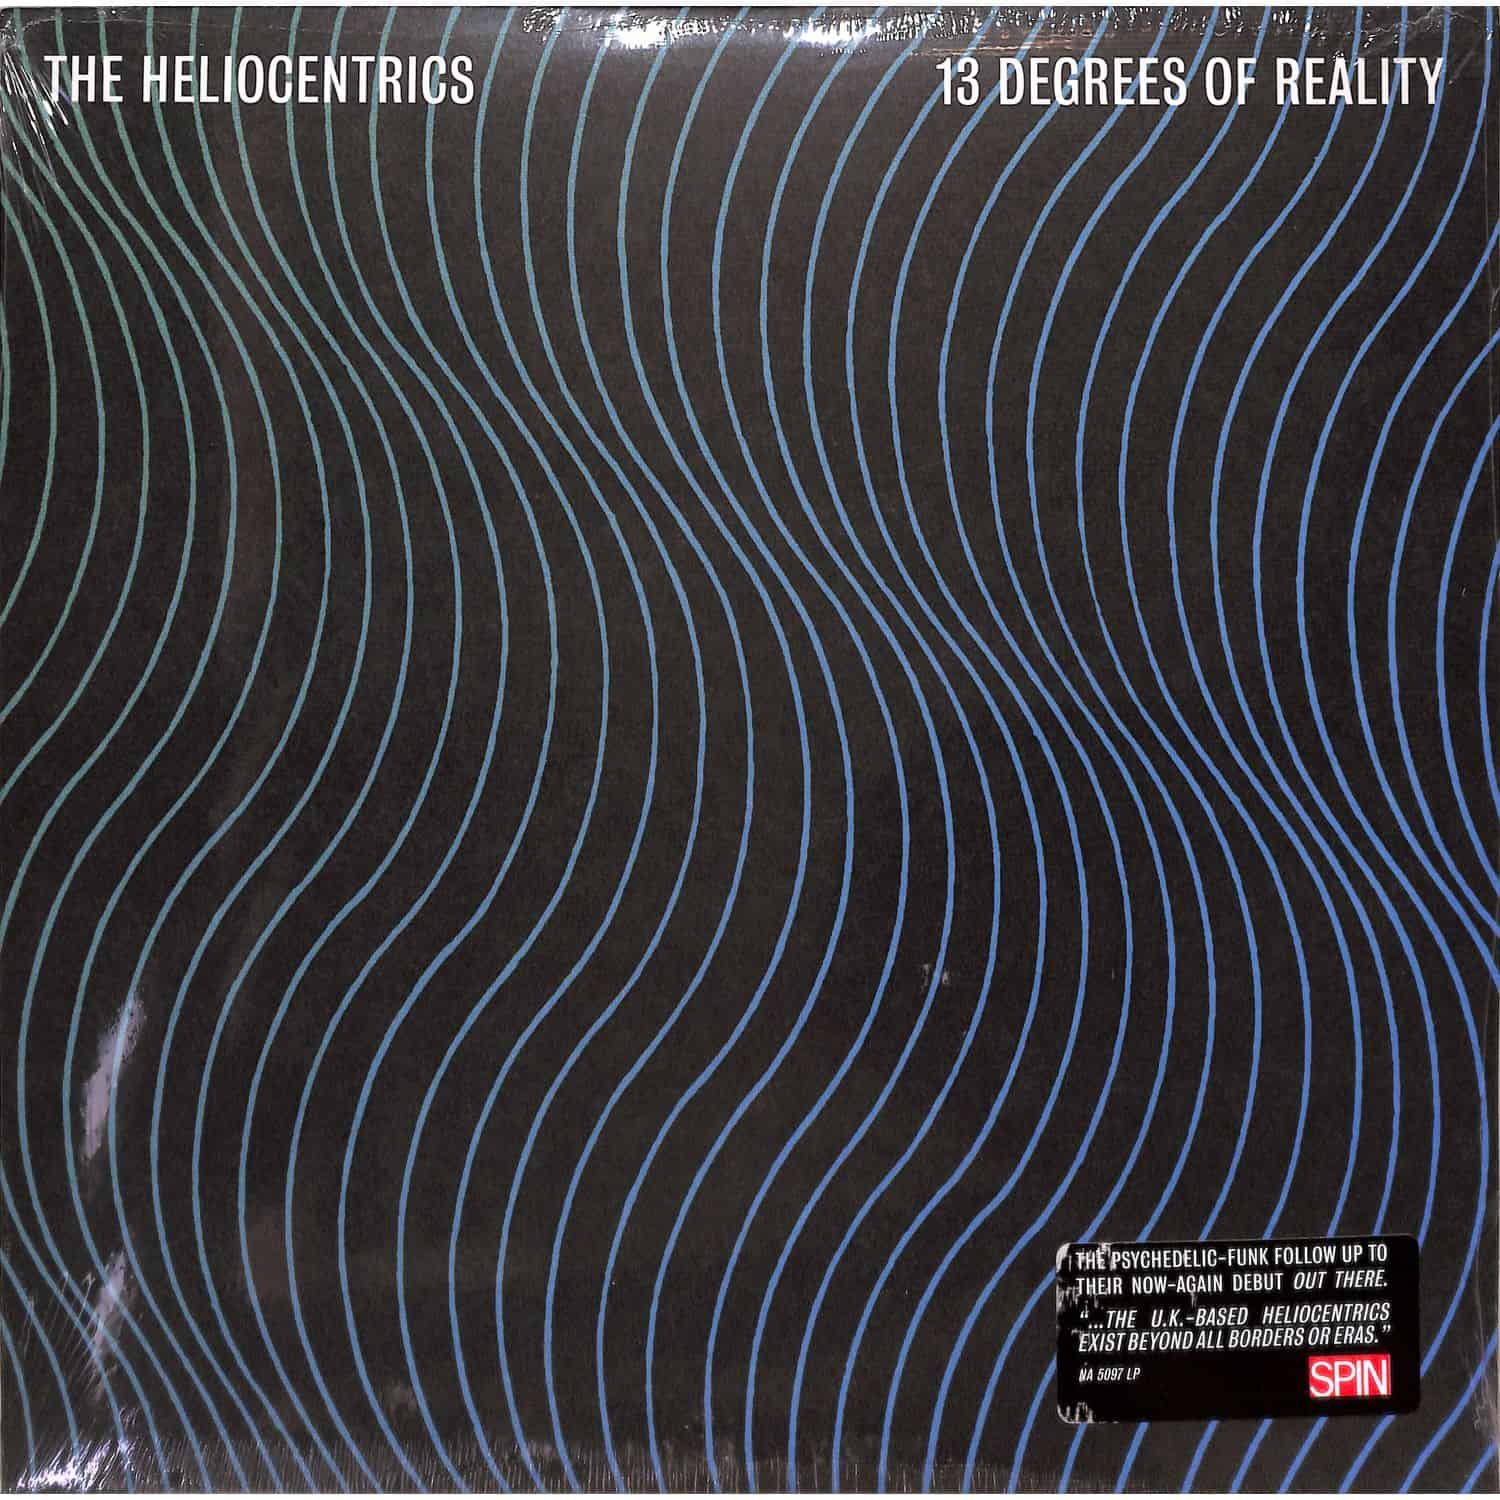 The Heliocentrics - 13 DEGREES OF REALITY 